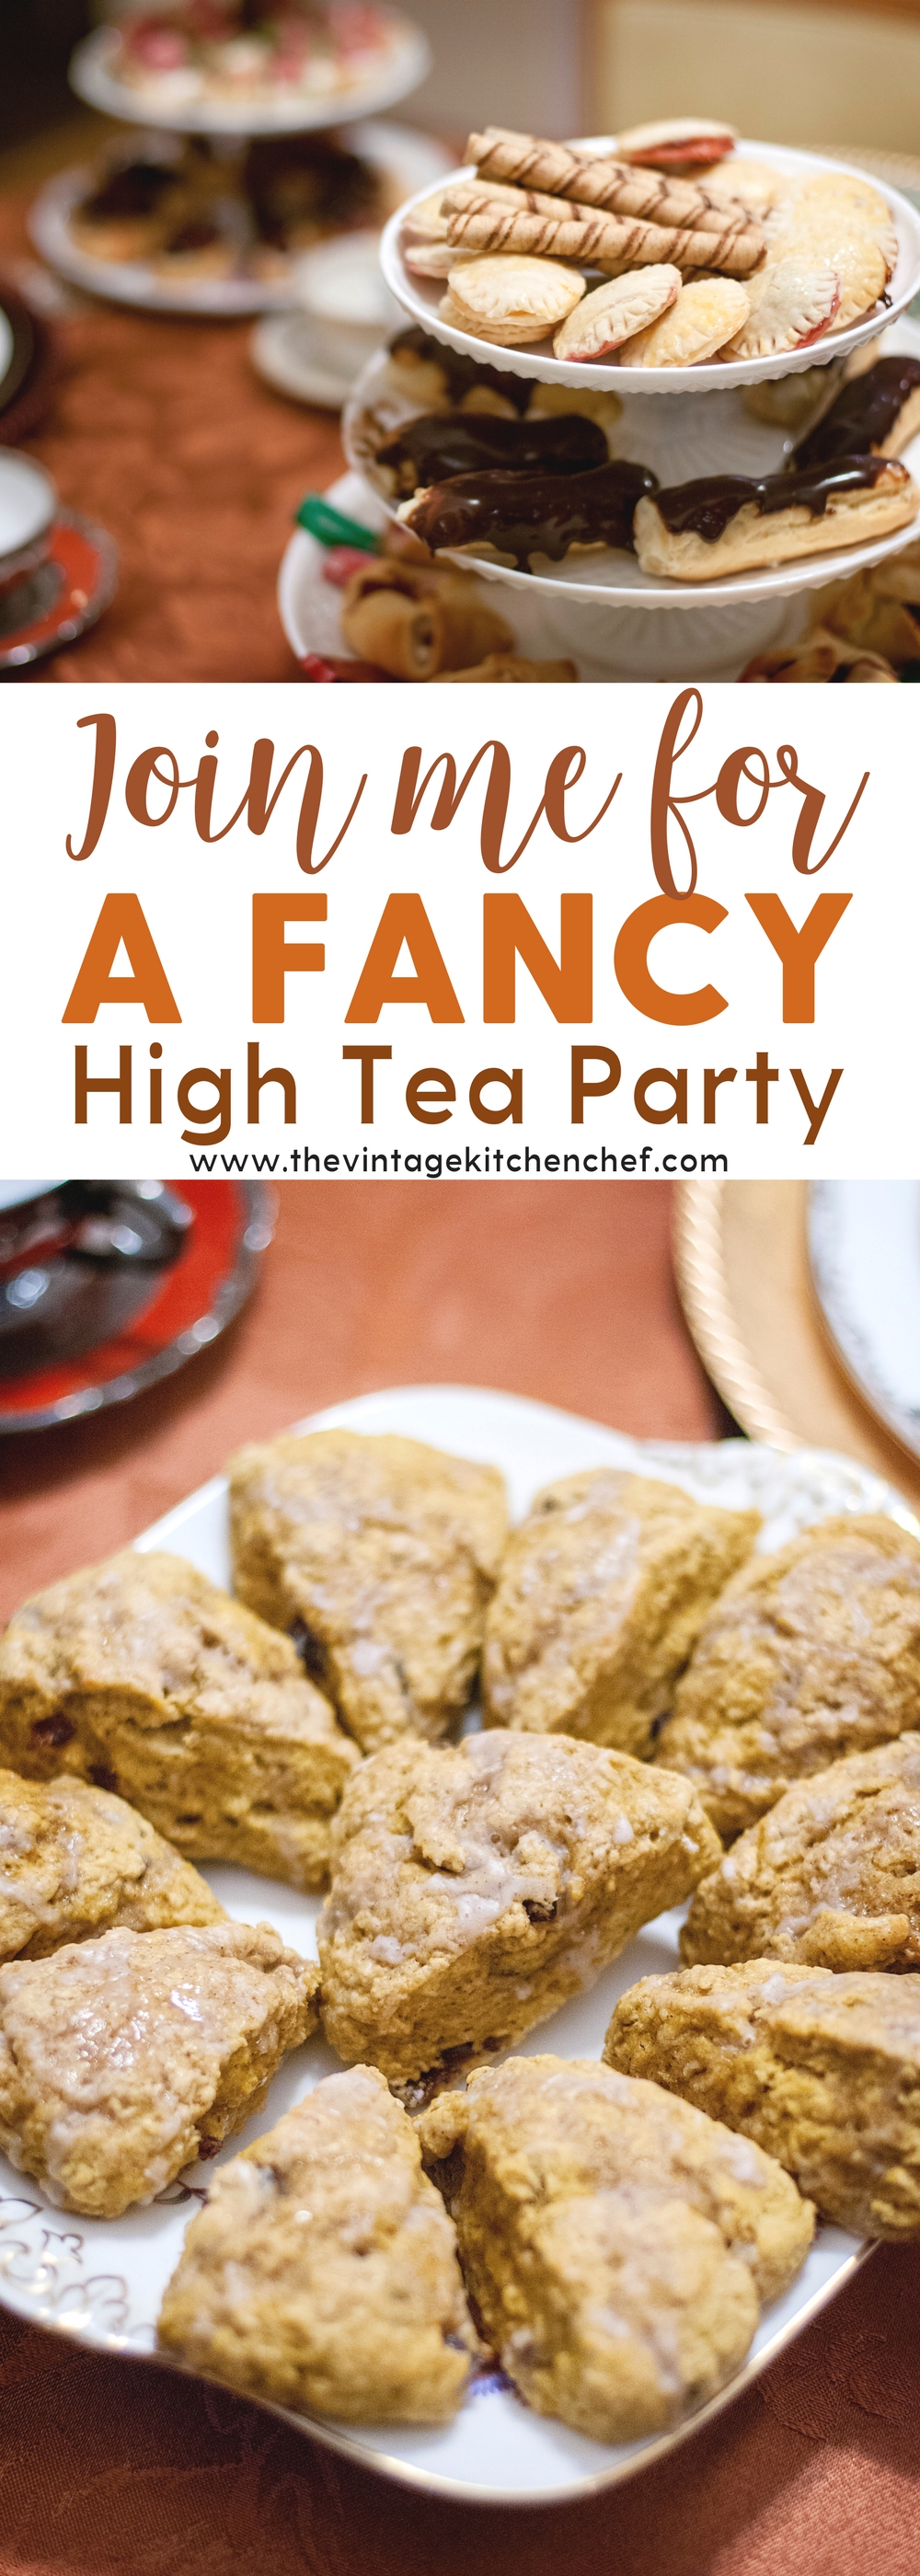 A few synonyms for fancy are lavish, elegant and special. Join me for some thoughts and ideas on how to host a special tea for your family and friends.